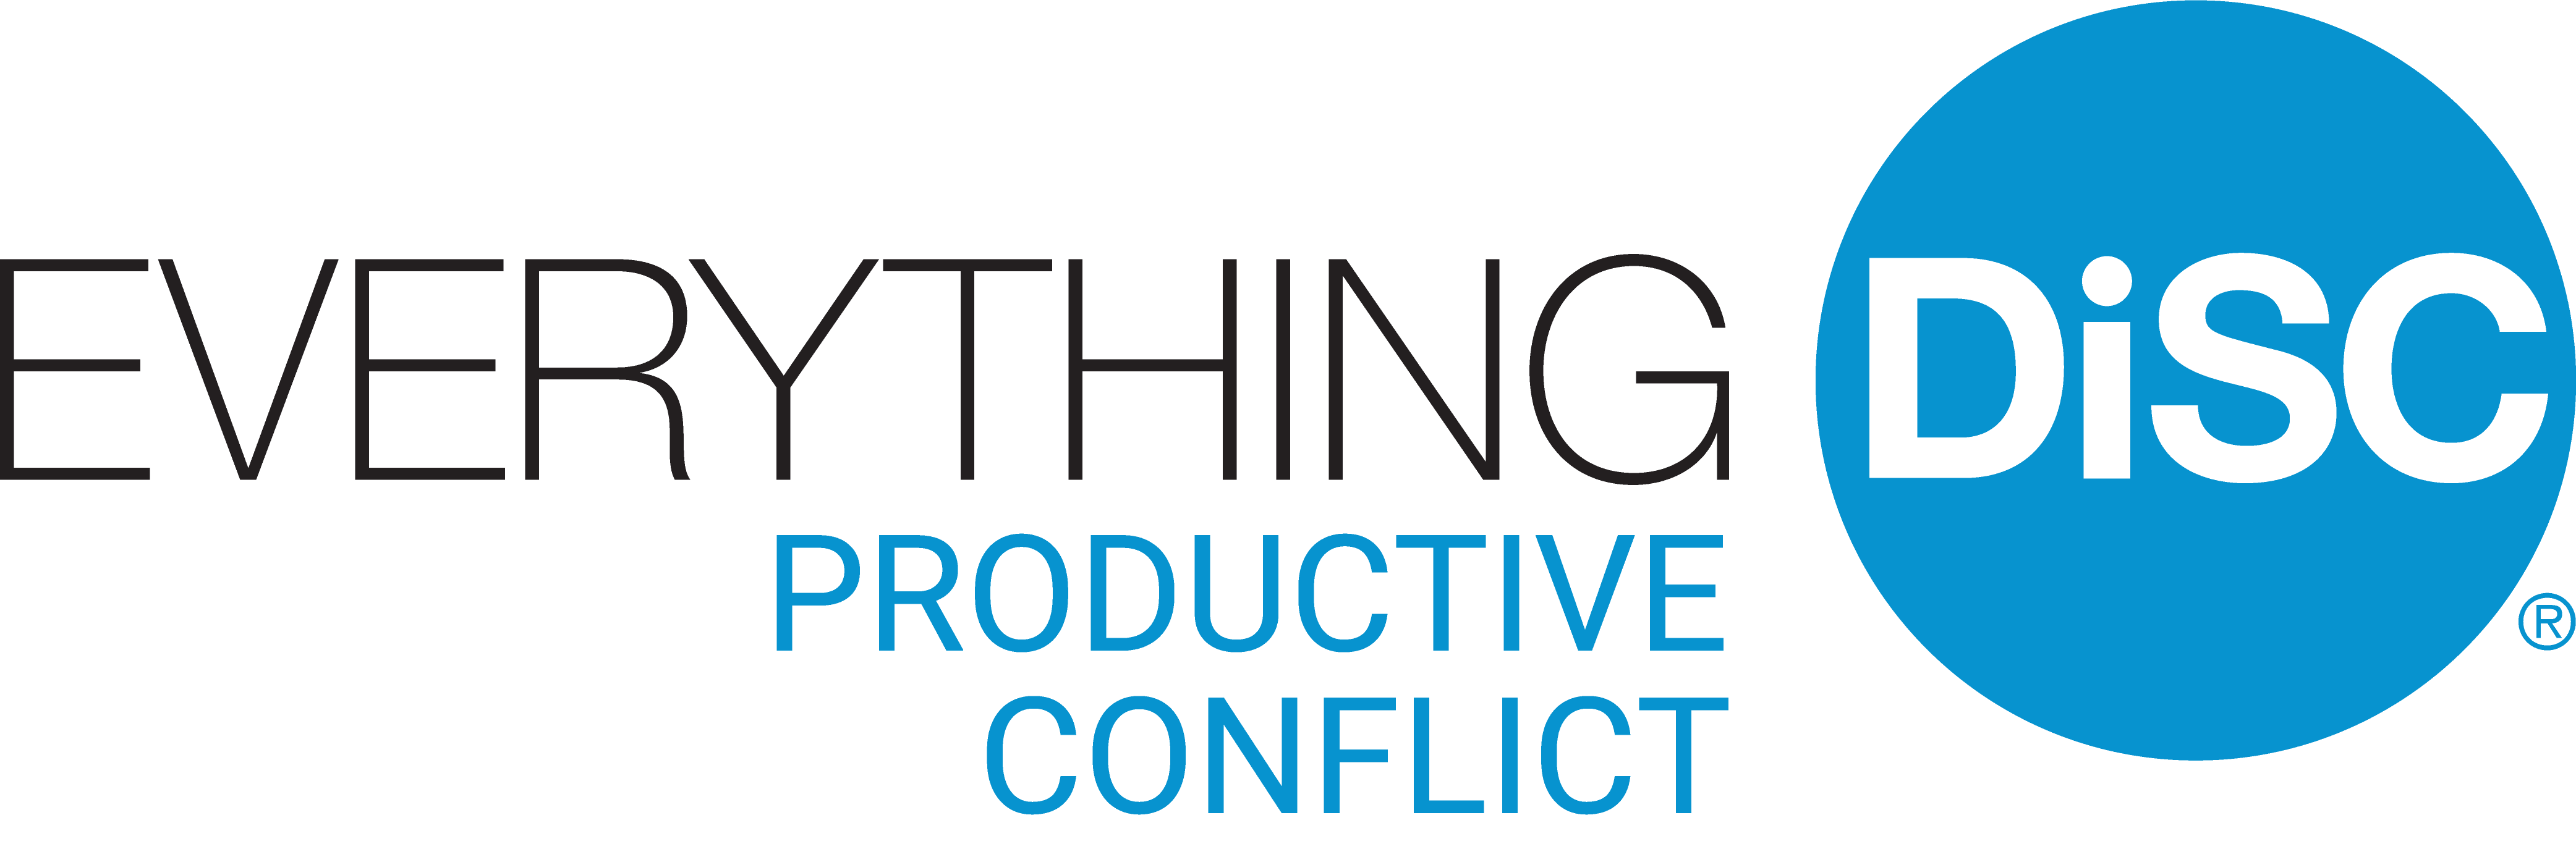 Everything DiSC Productive Conflict logo